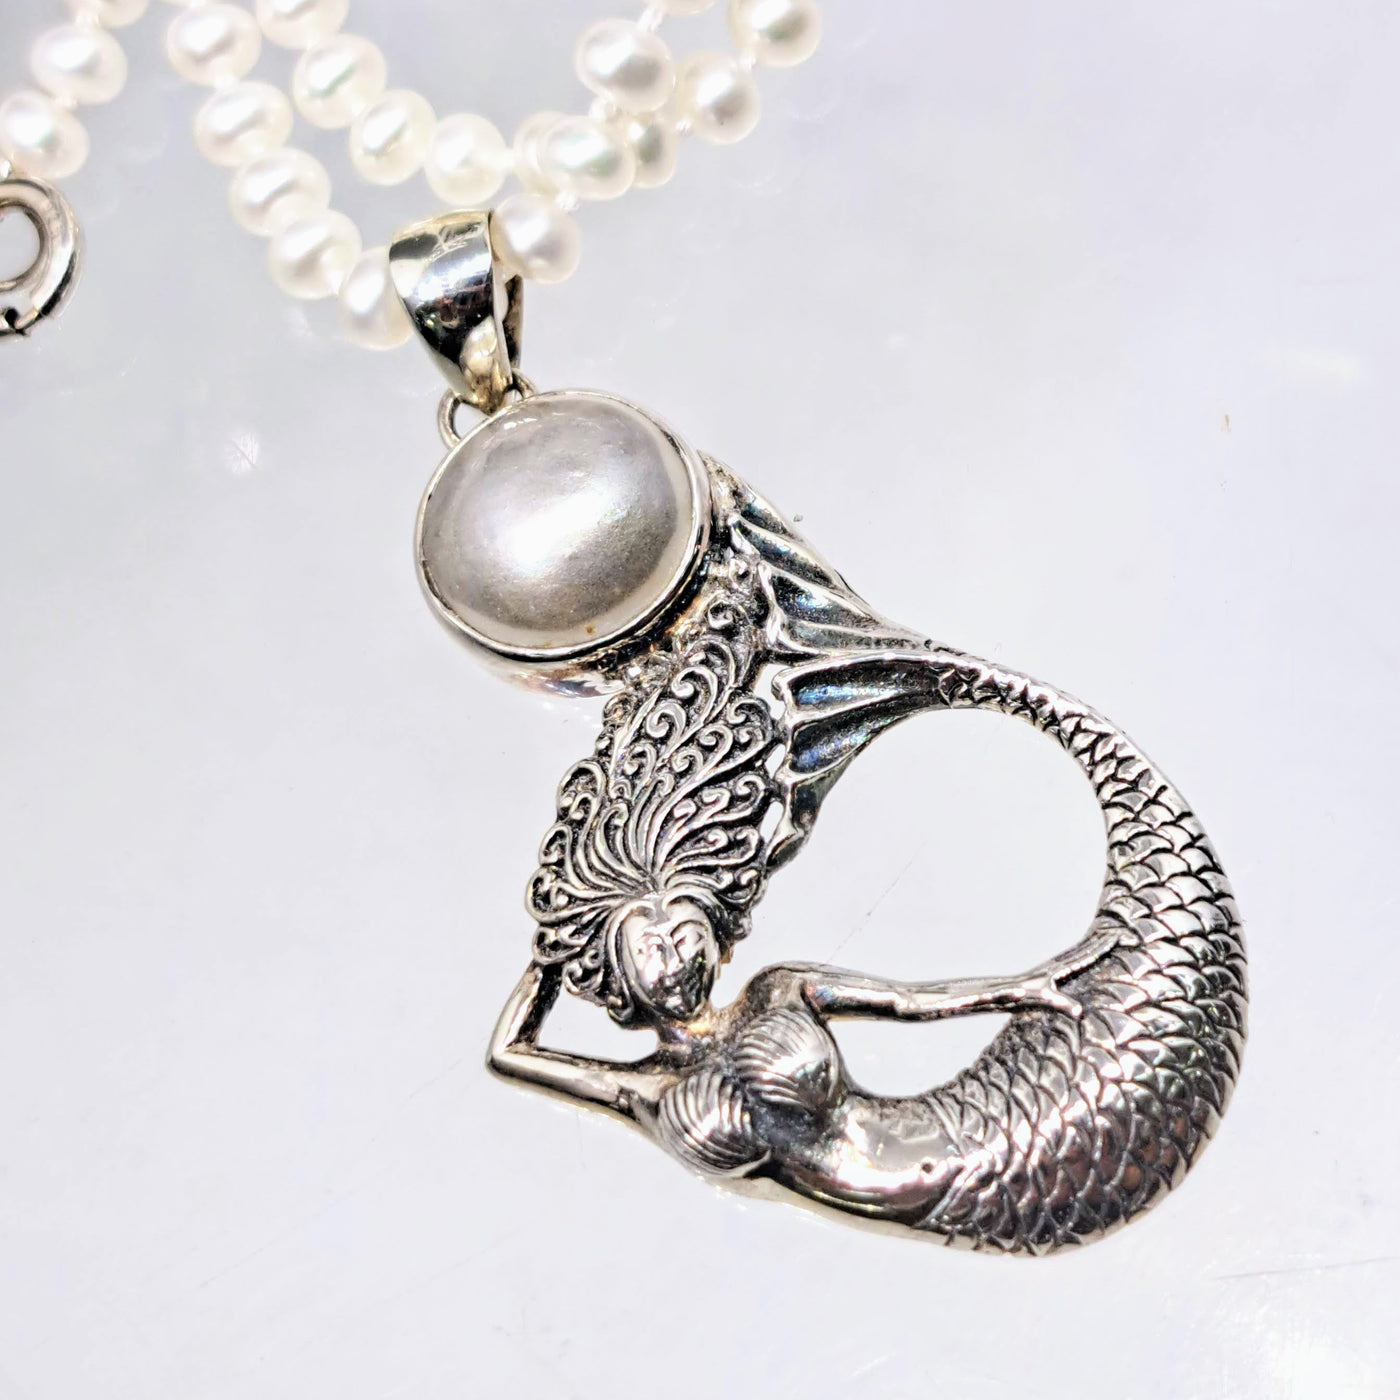 "Mabe' I'm A Mermaid!" 2" Pendant 18" Necklace -Pearls, Sterling